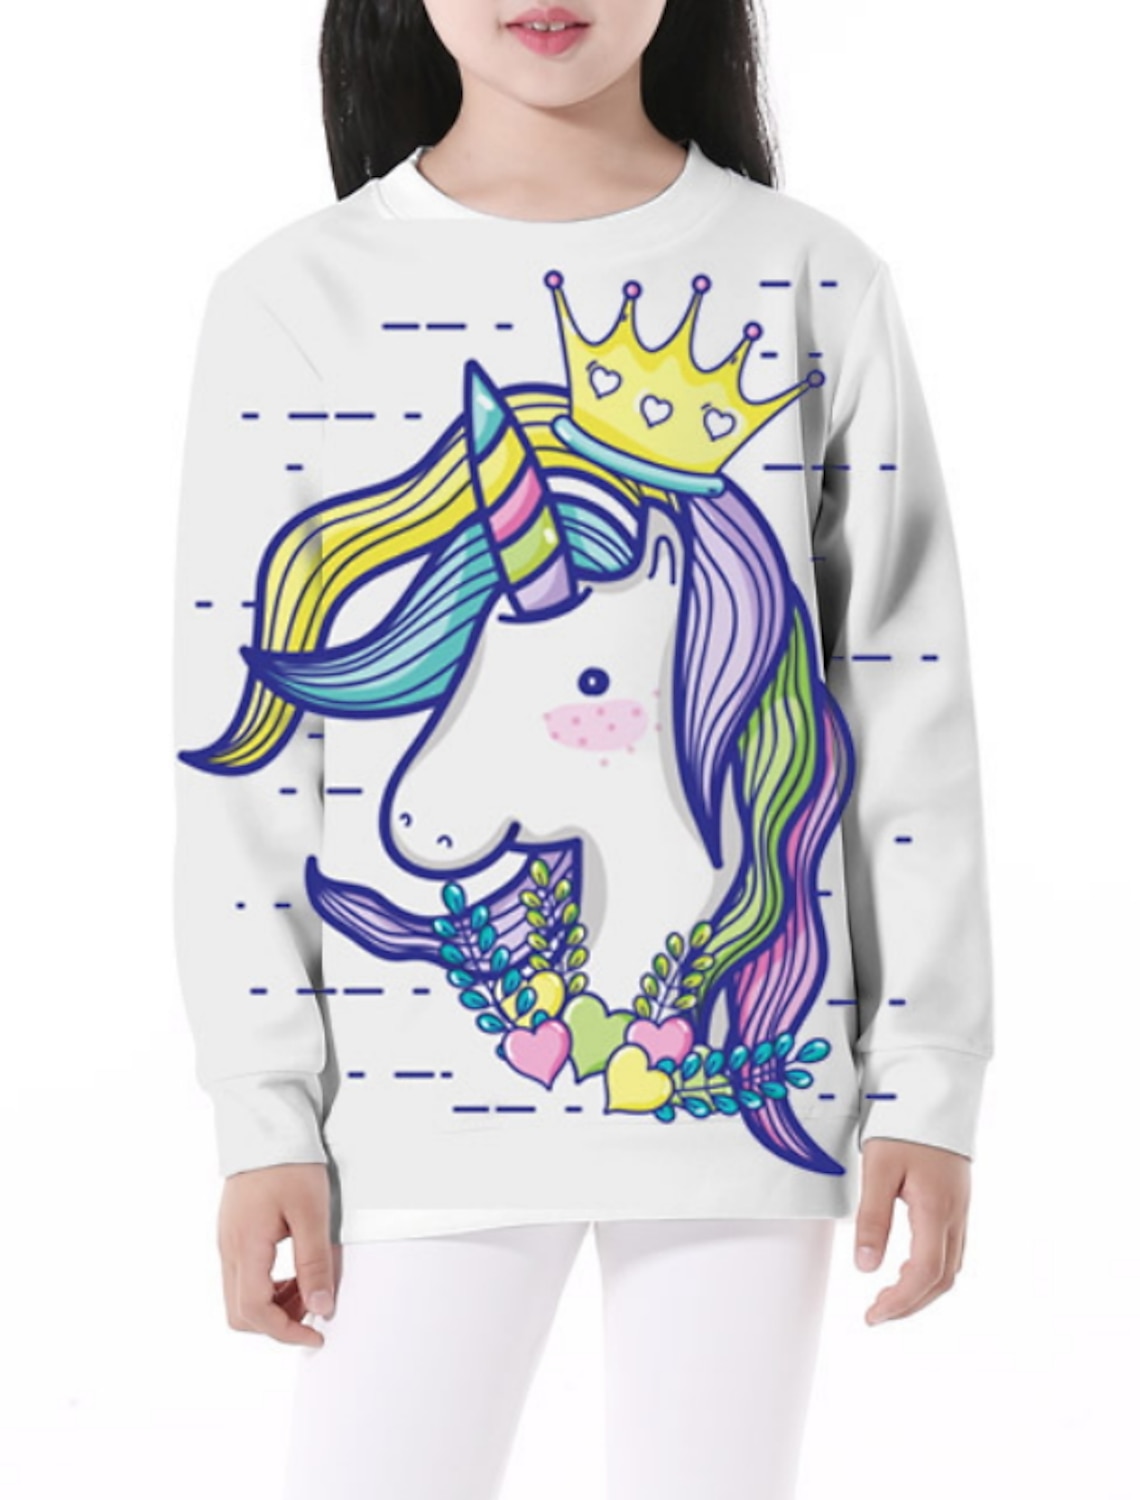 Unicorn Boys Girls Pullover Sweaters Crewneck Sweatshirts Clothes for 2-6 Years Old Children